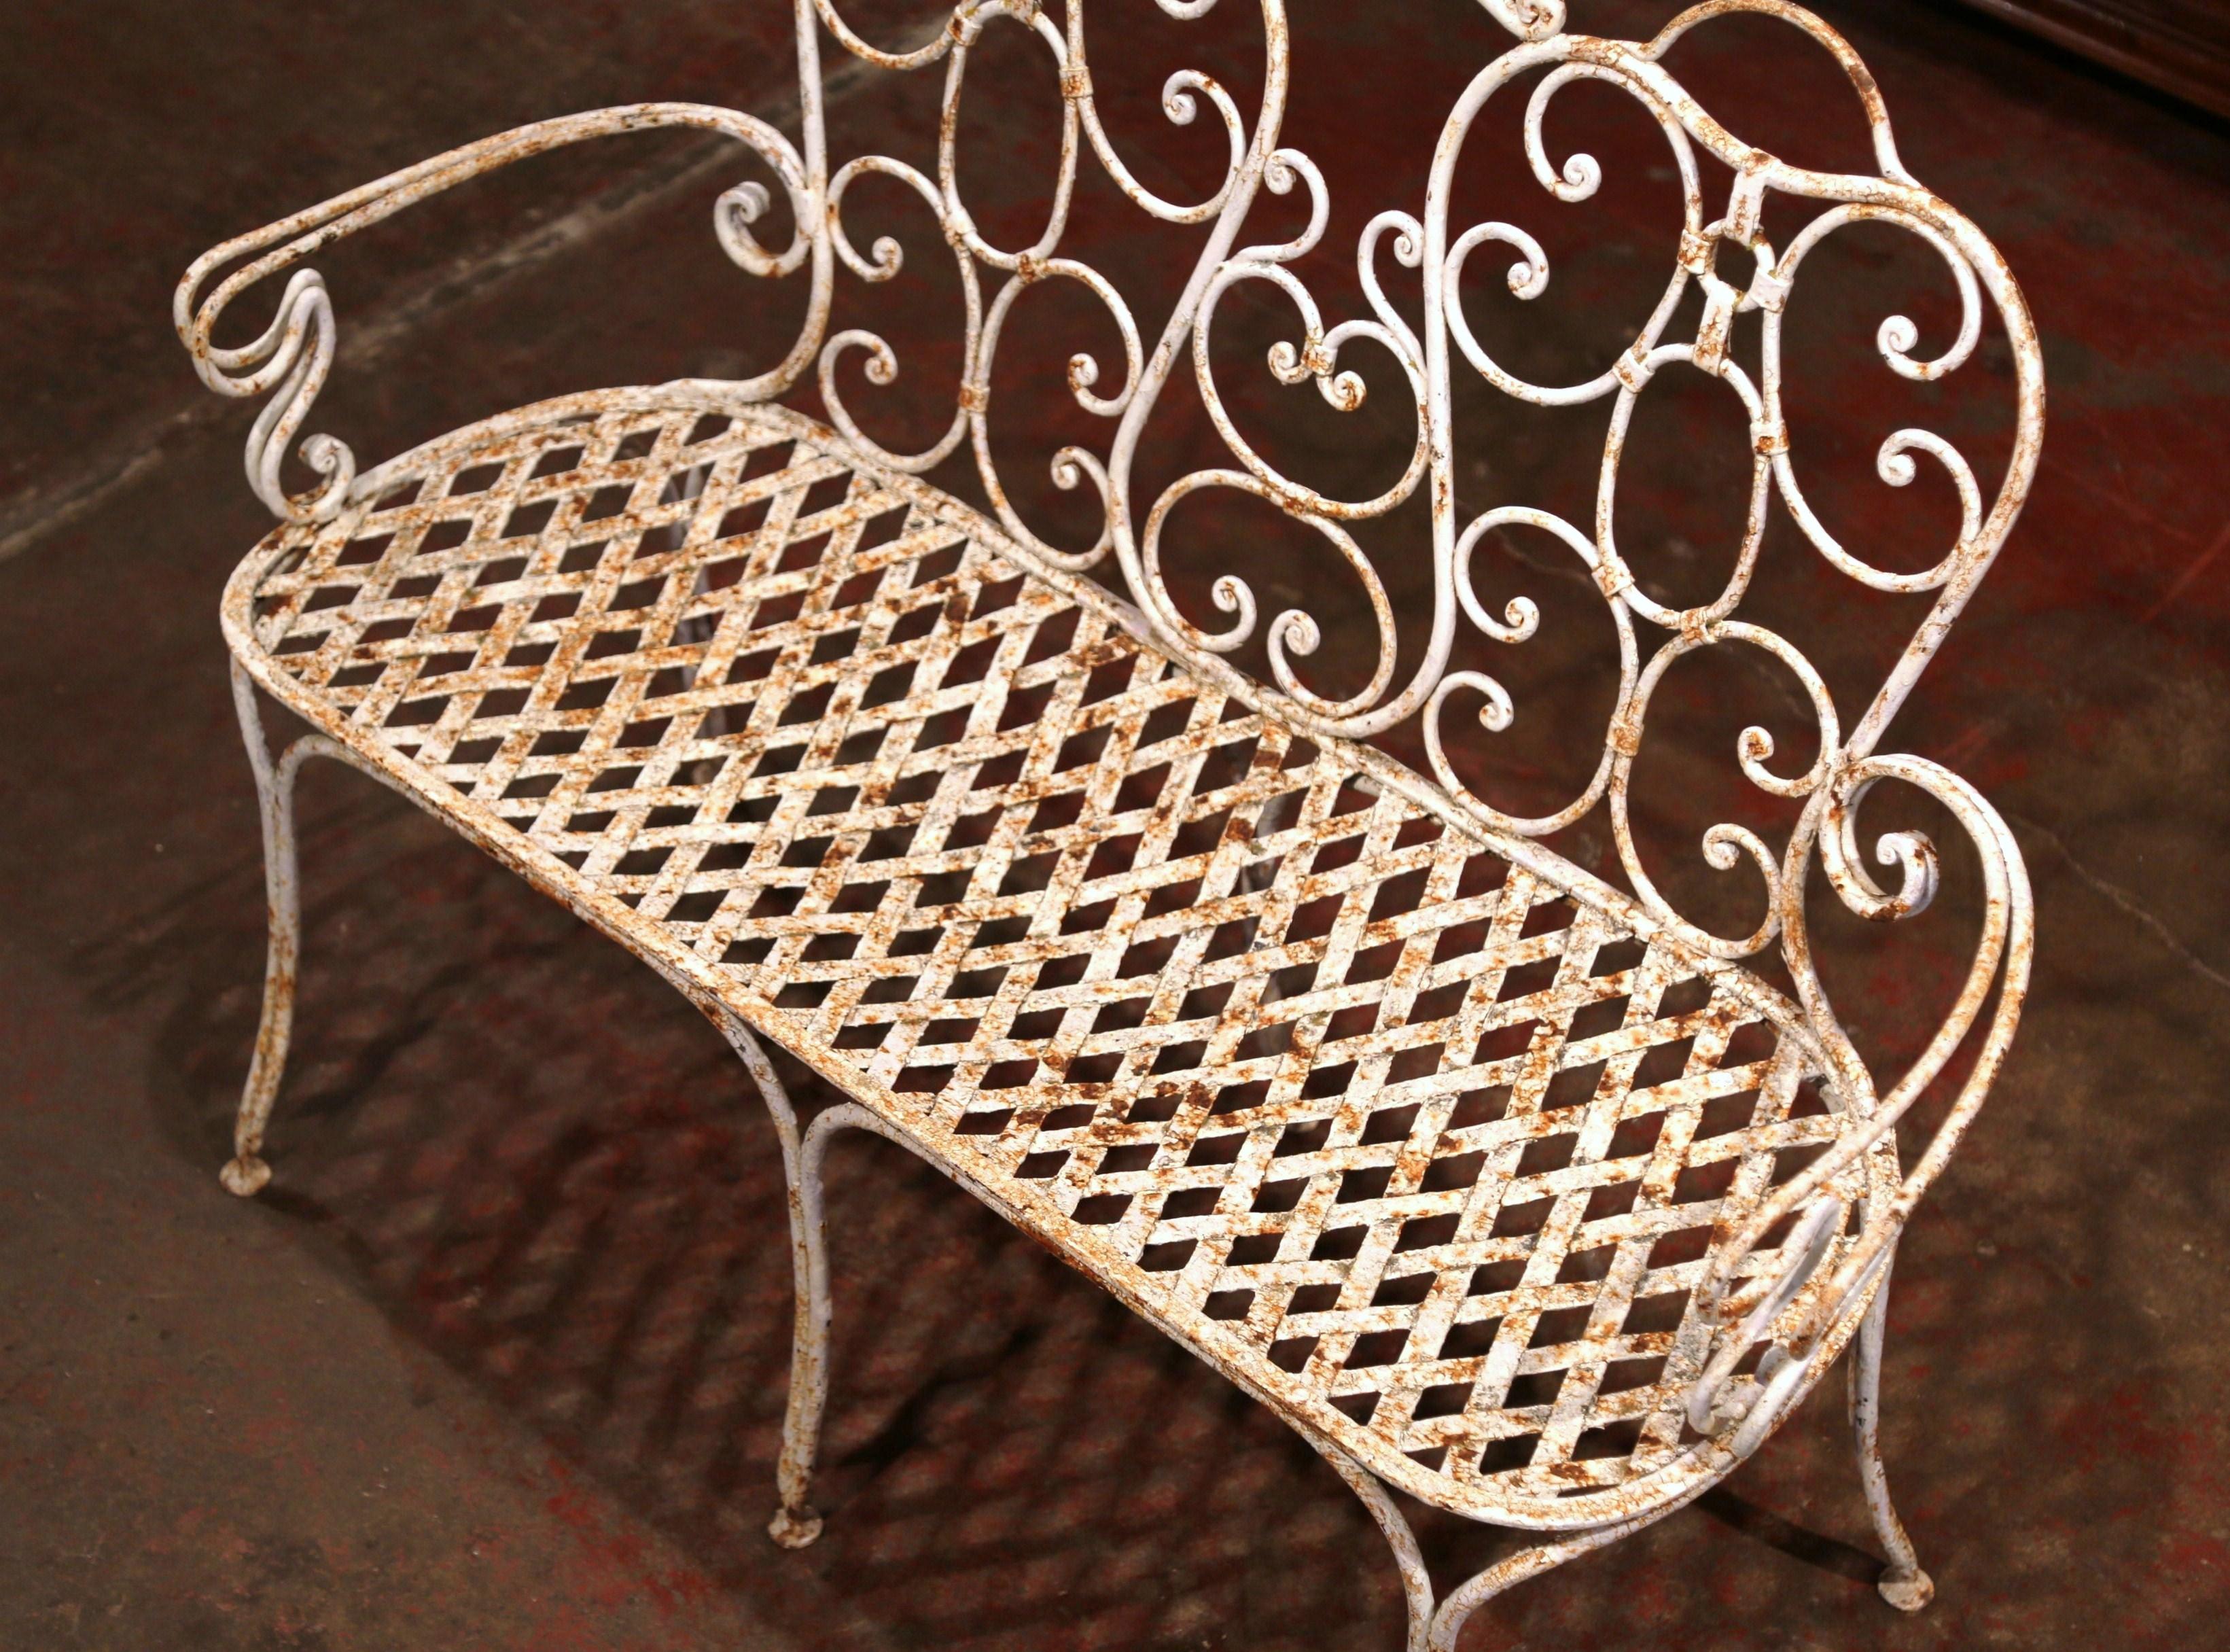 Hand-Painted 19th Century French Scroll Painted Iron Six-Leg Garden Bench from Normandy